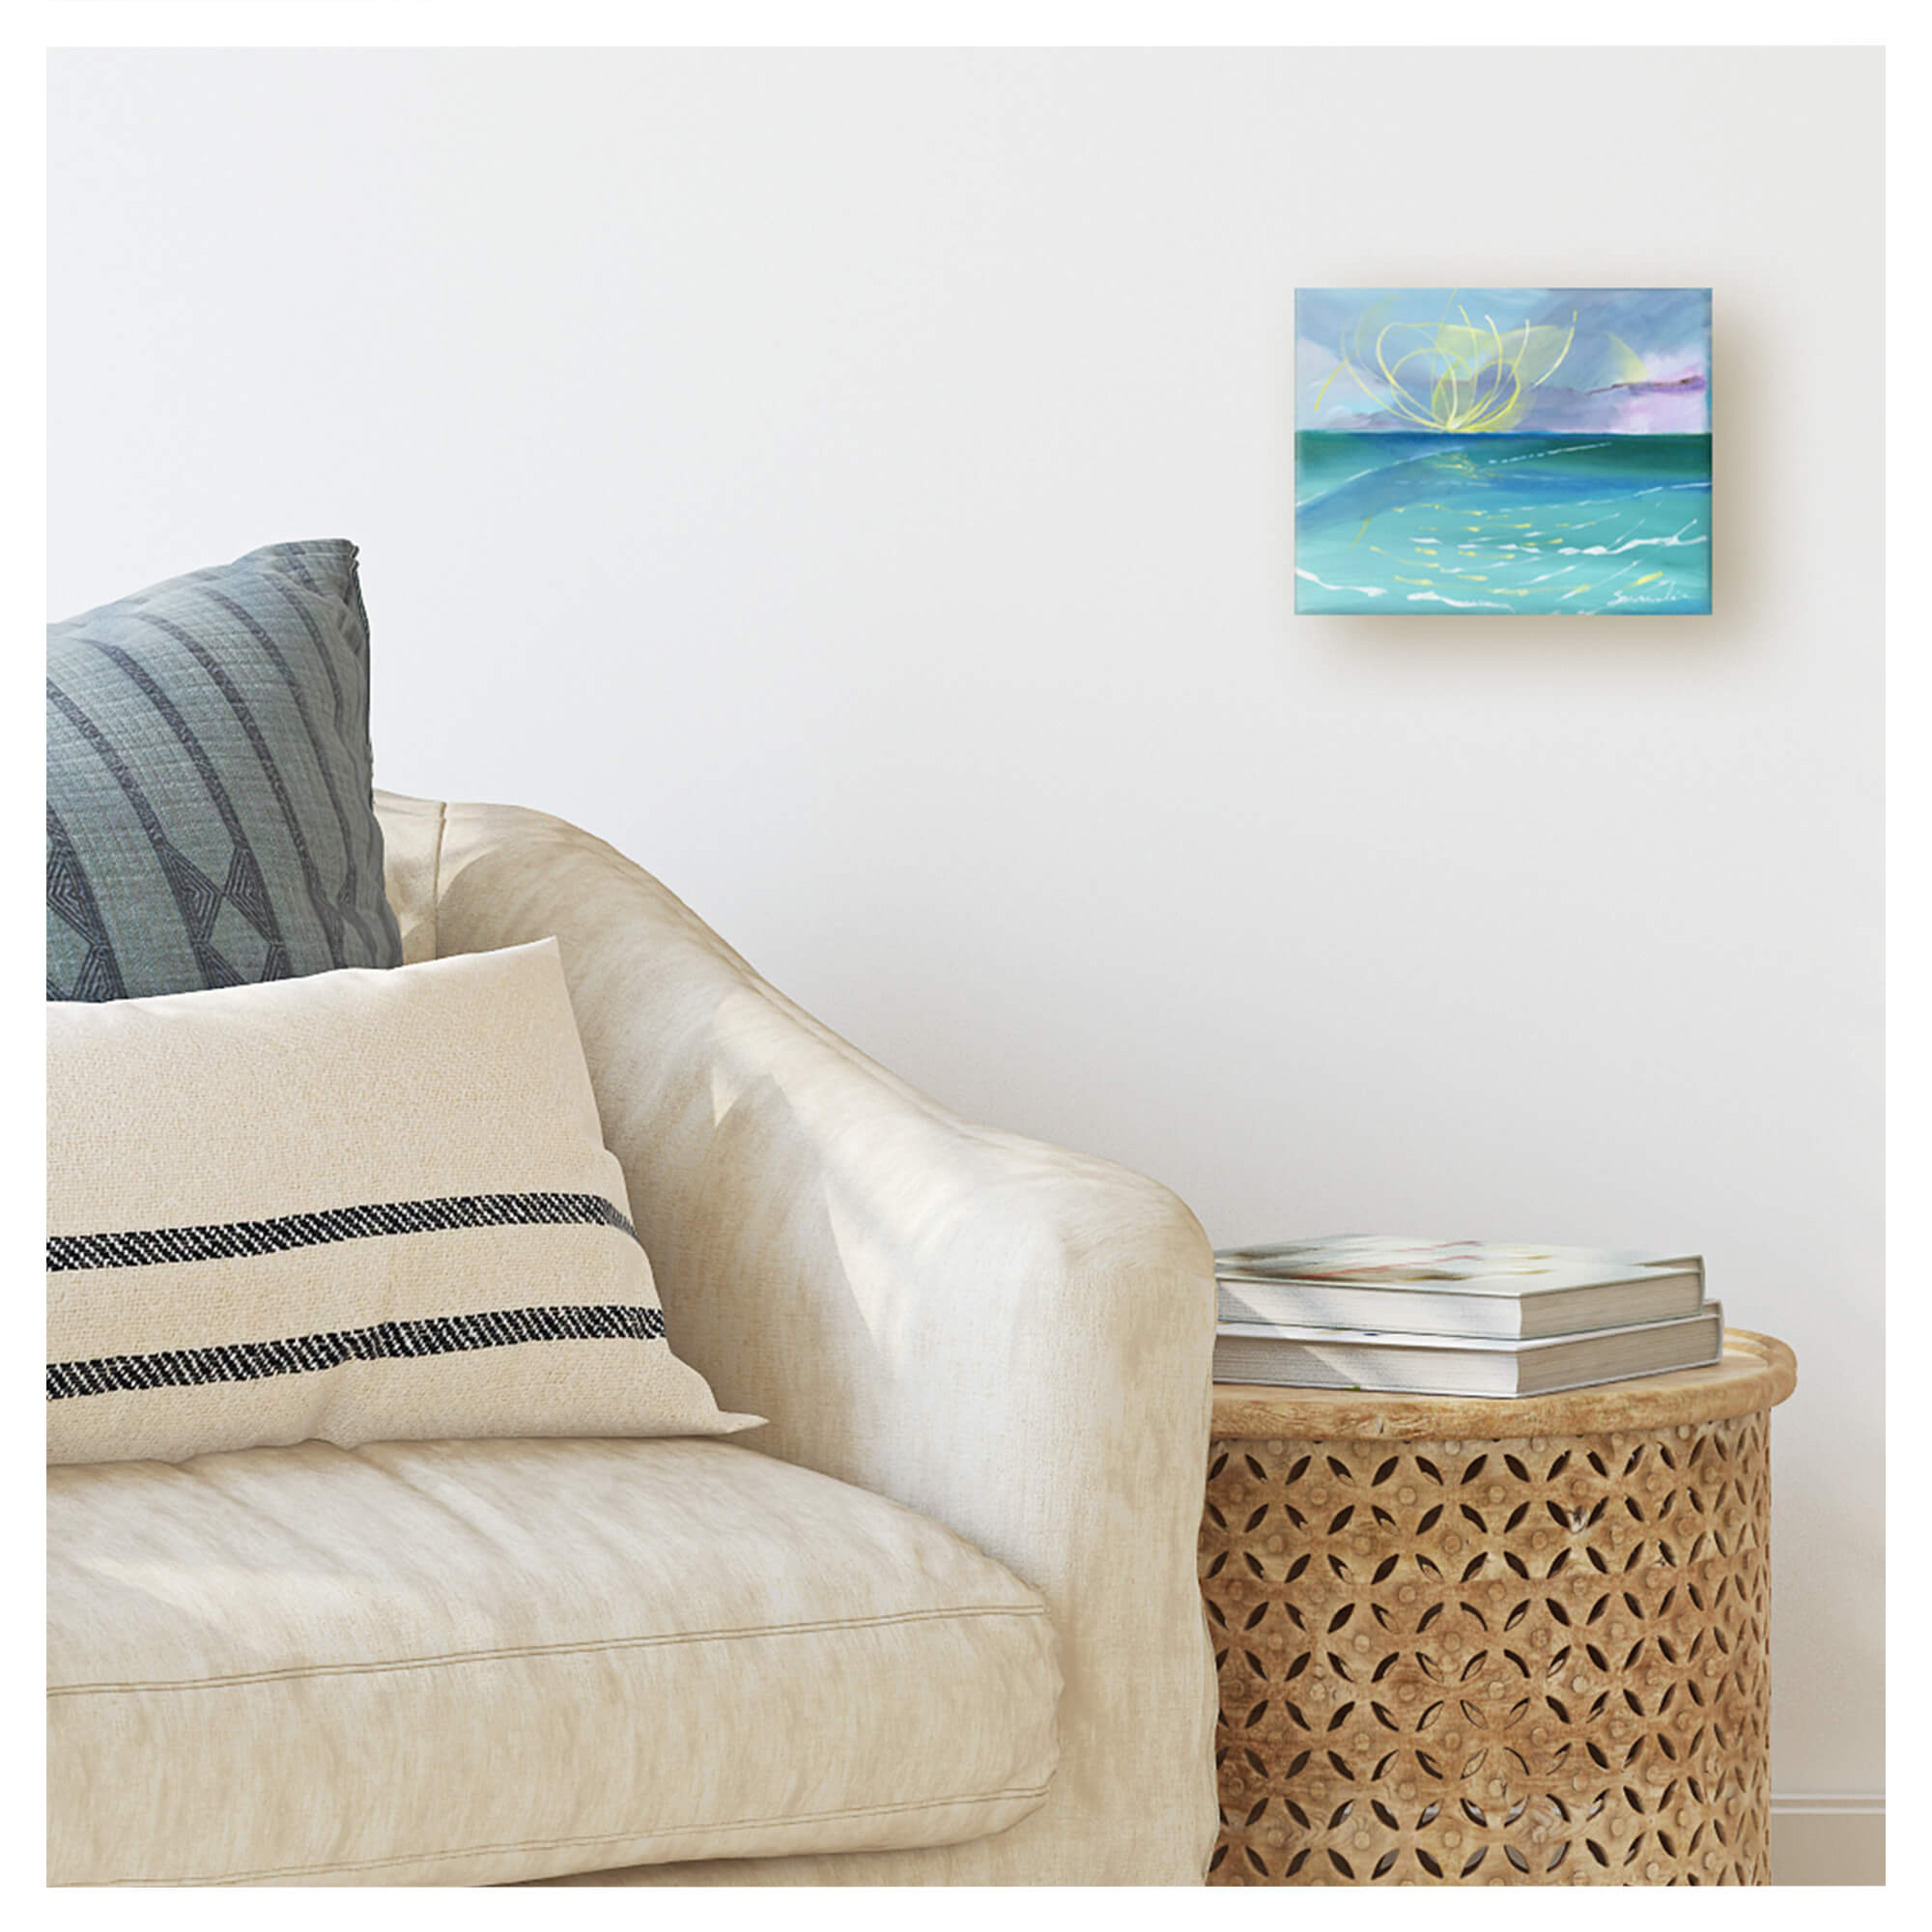 Mini canvas original painting of a serene seascape with teal-hued waters by Hawaii artist Saumolia Puapuaga